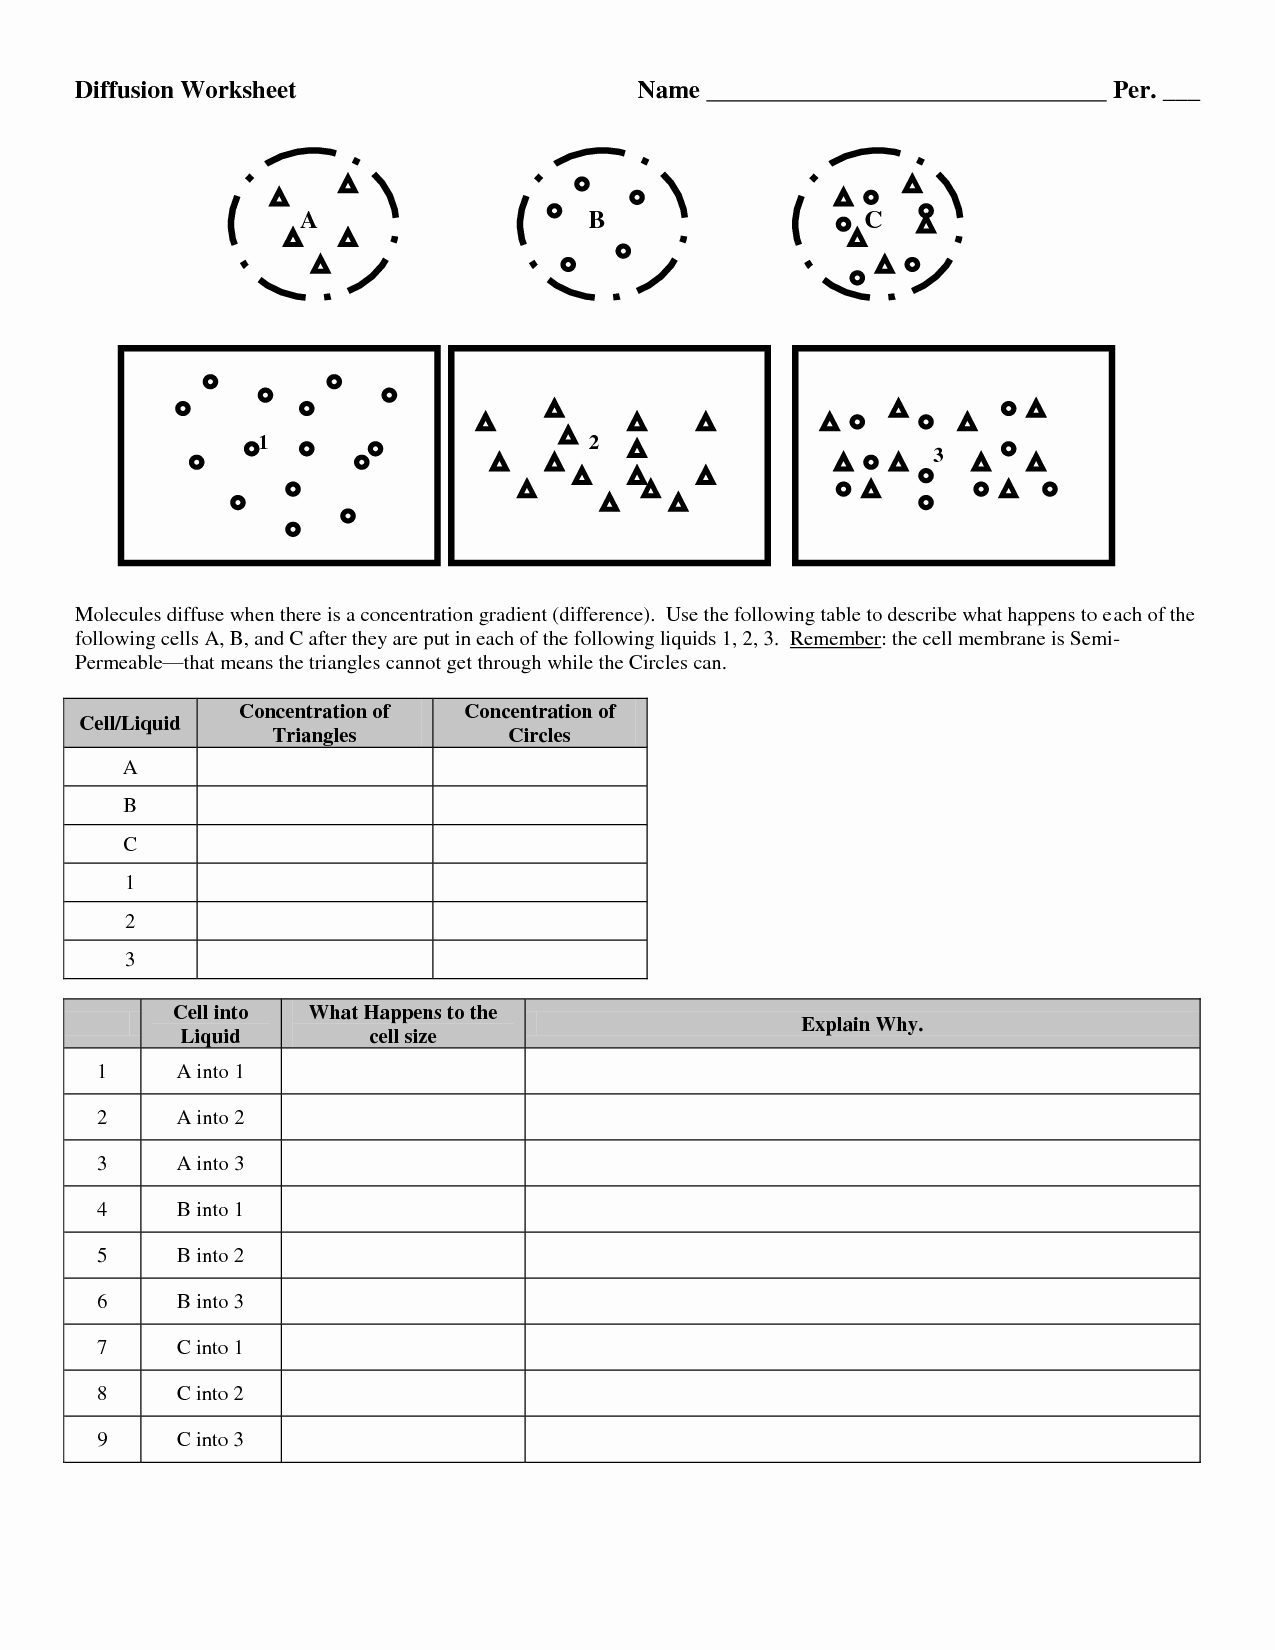 Passive and Active Transport Worksheet Fresh 7 Best Of Active and Passive Transport Worksheet